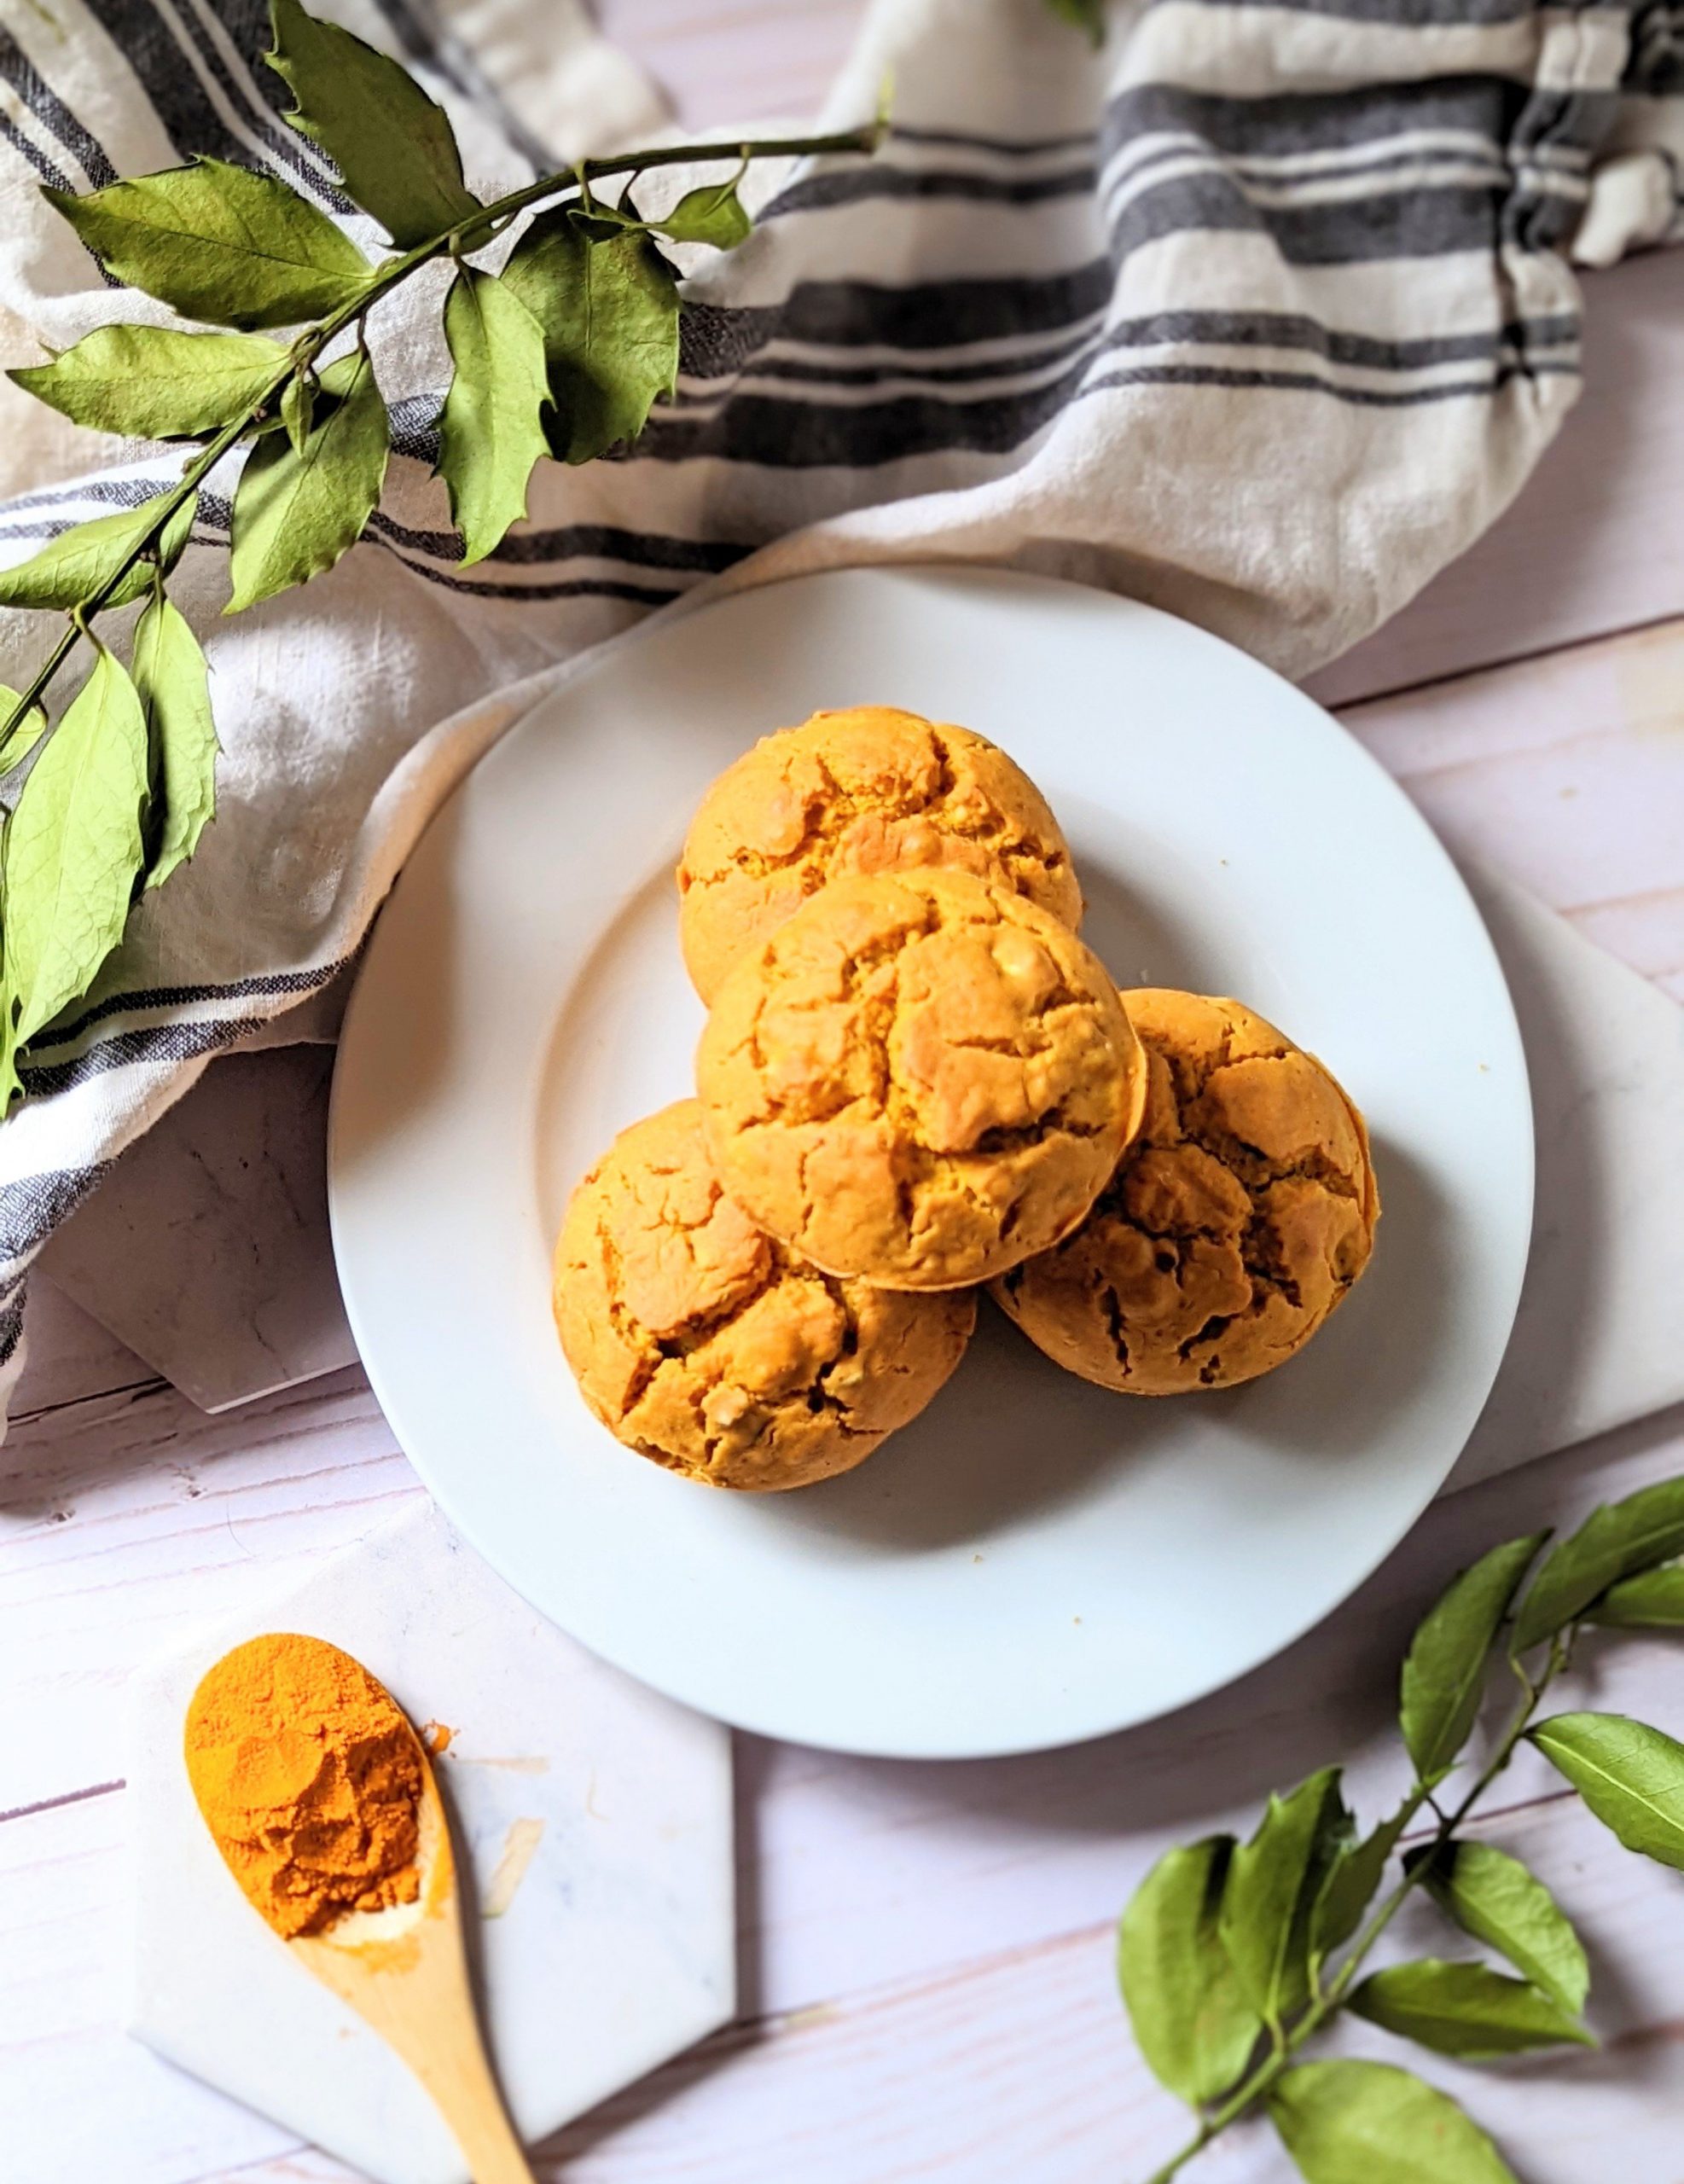 chickpea turmeric muffins recipe gluten free healthy savory muffins with turmeric spice and dairy free chickpea flour gram or besan flour